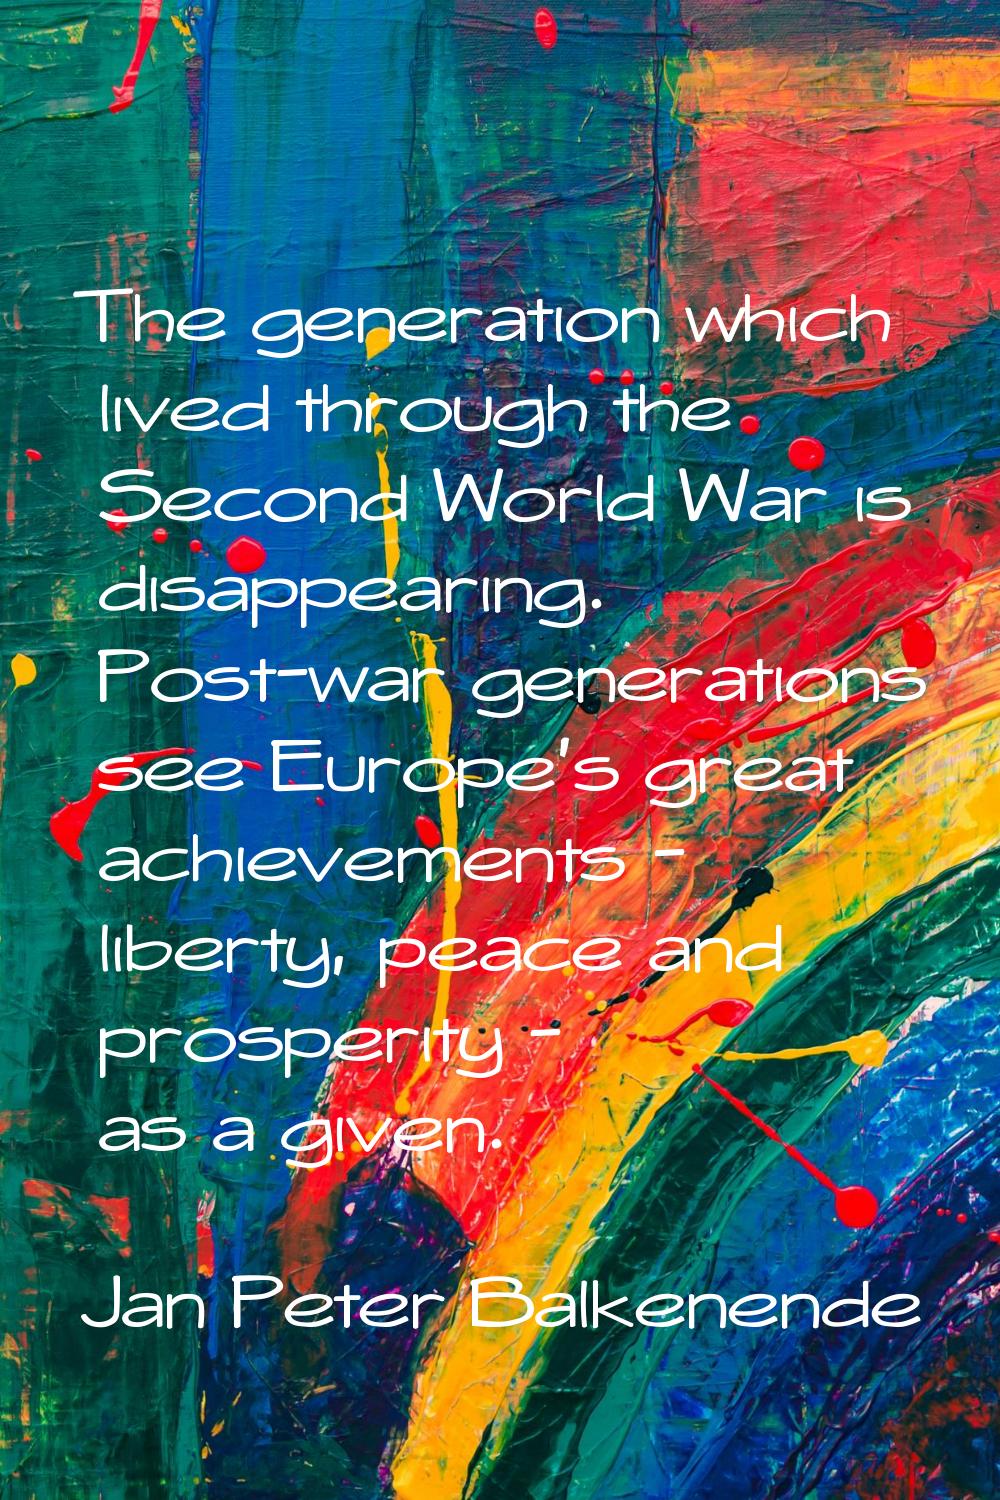 The generation which lived through the Second World War is disappearing. Post-war generations see E